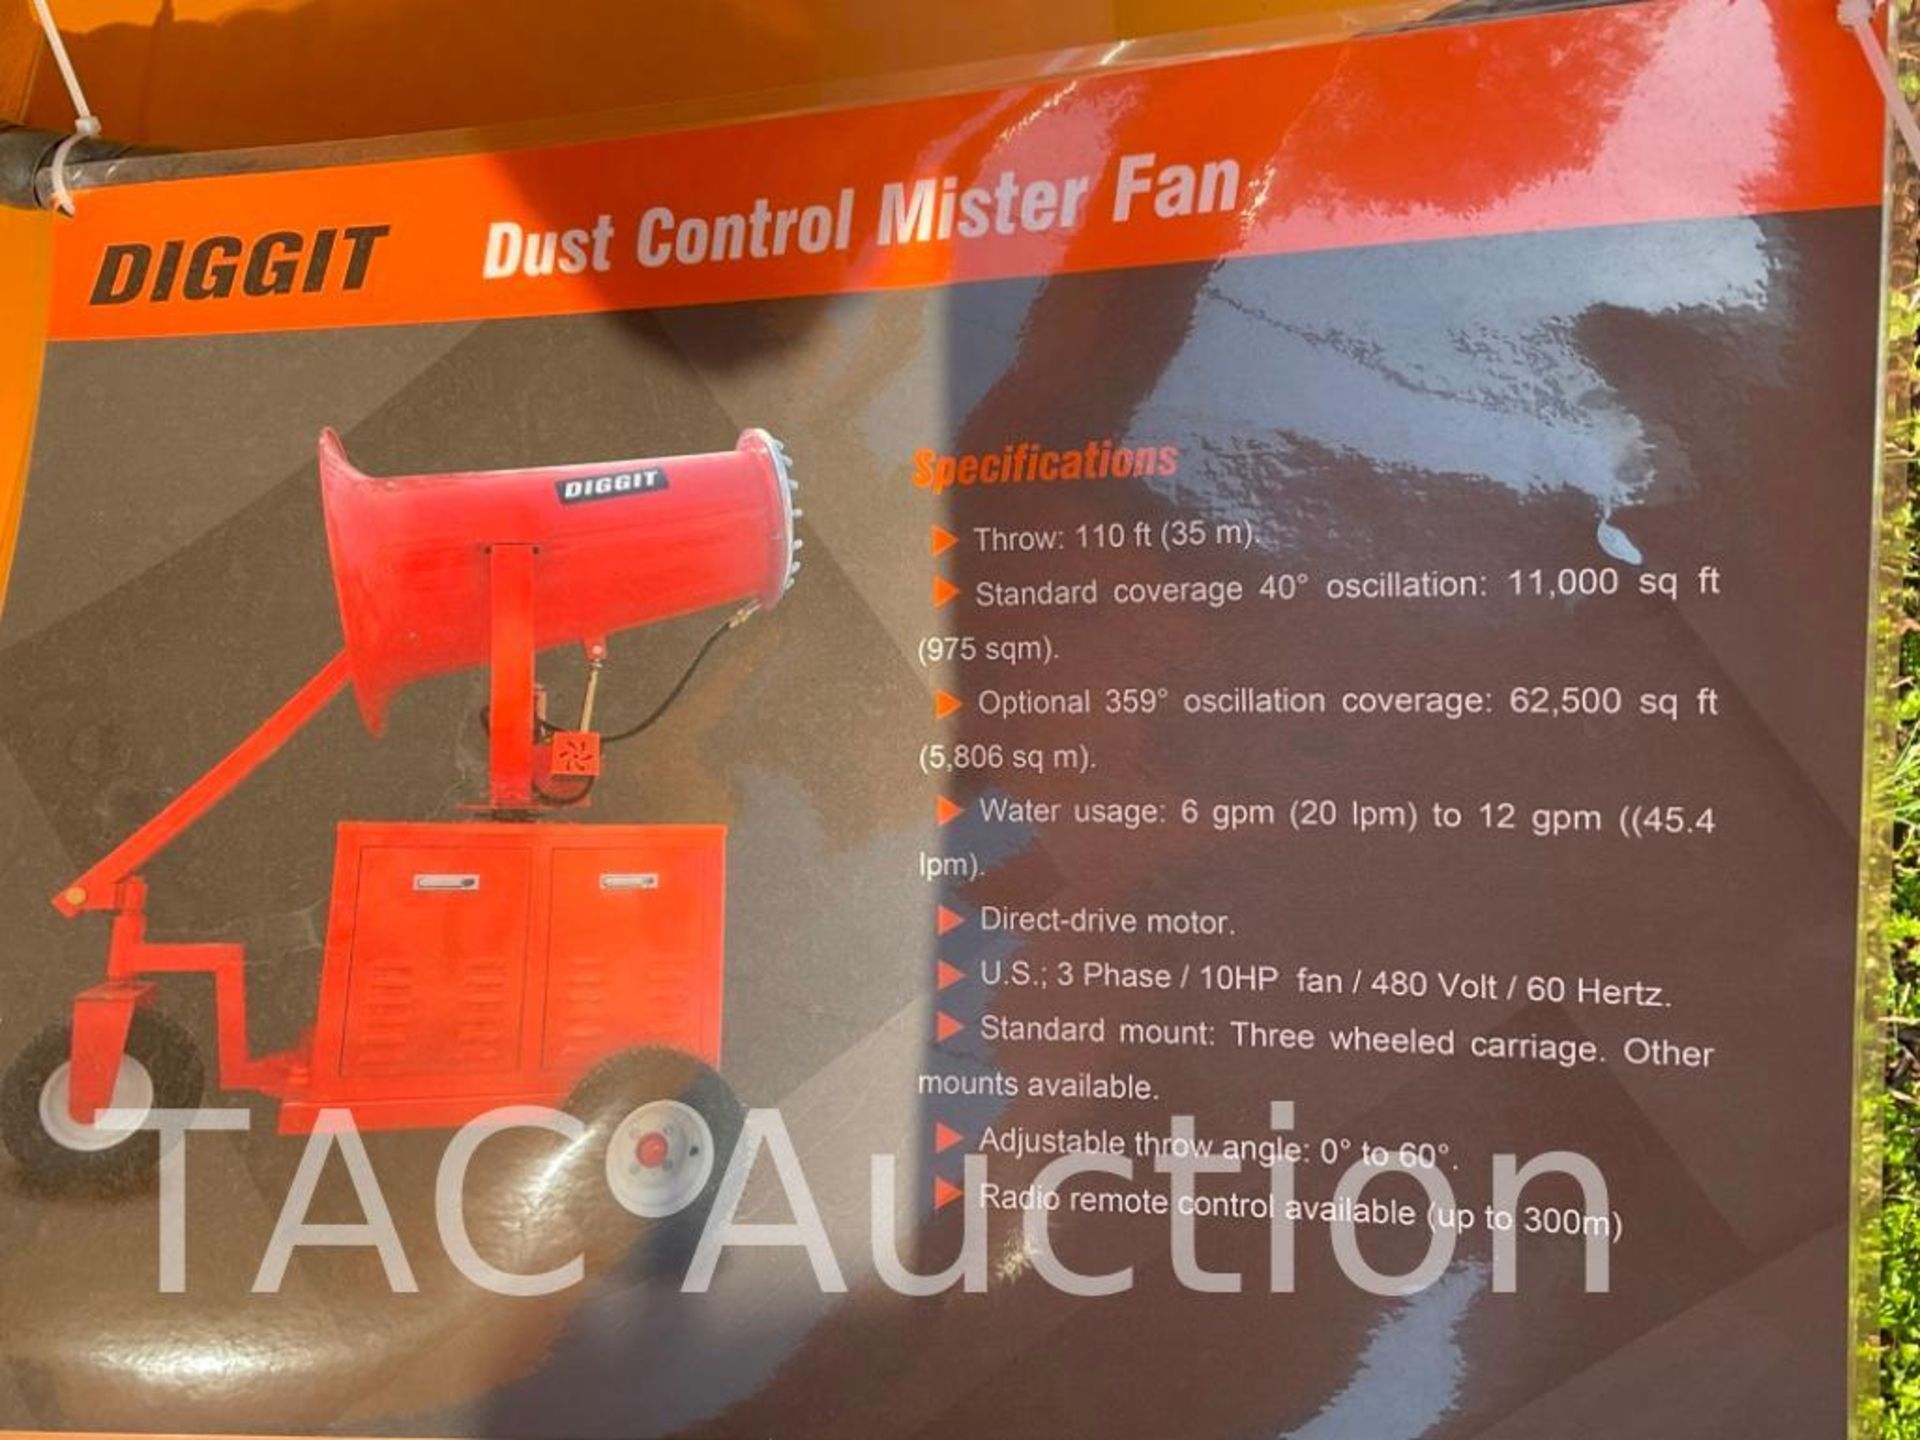 New Diggit DH35 Towable Dust Control Mister Fan - Image 9 of 11